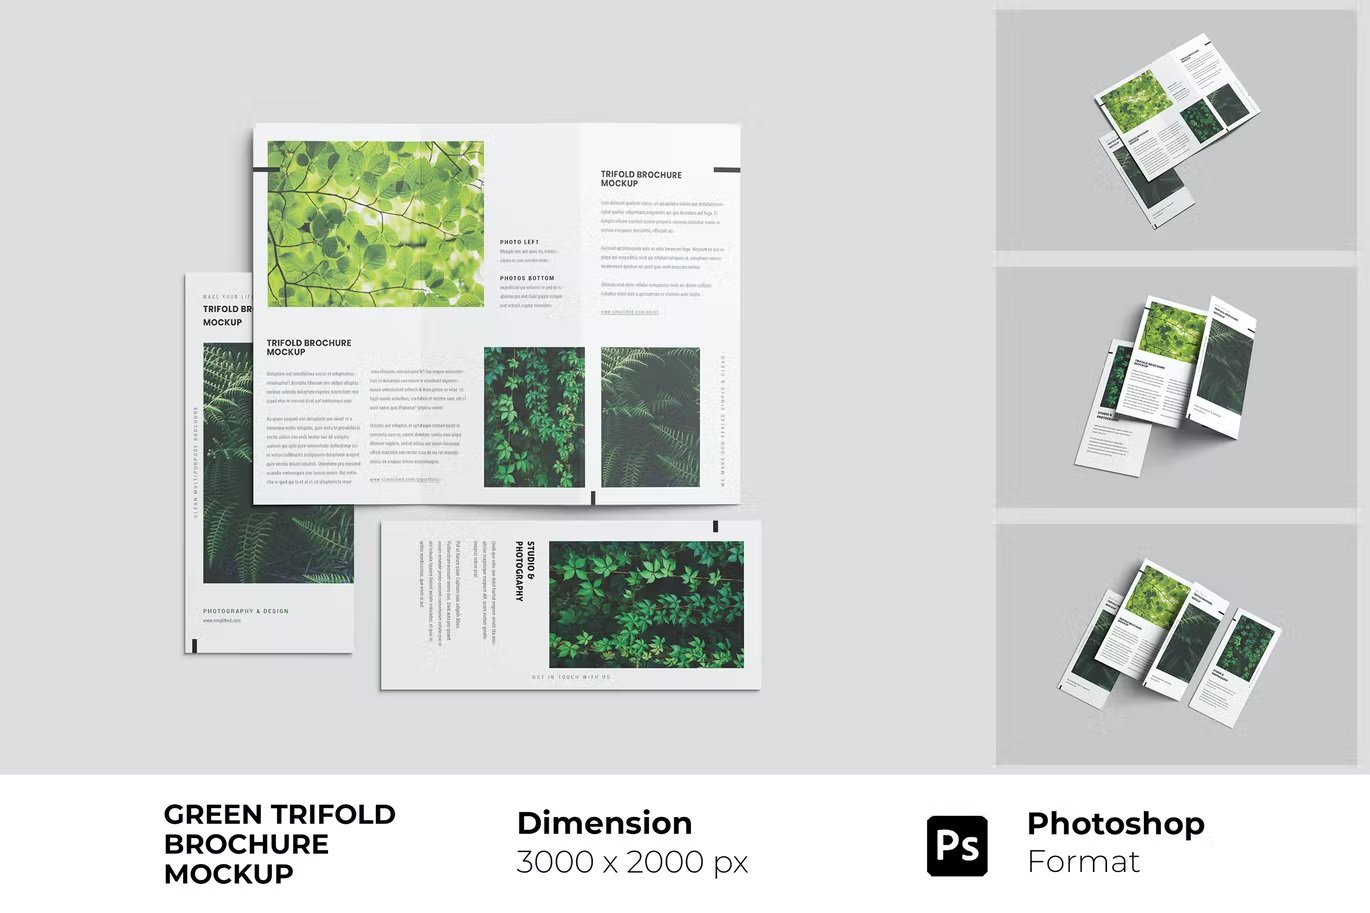 Green Trifold Brochure Mockup cover image.